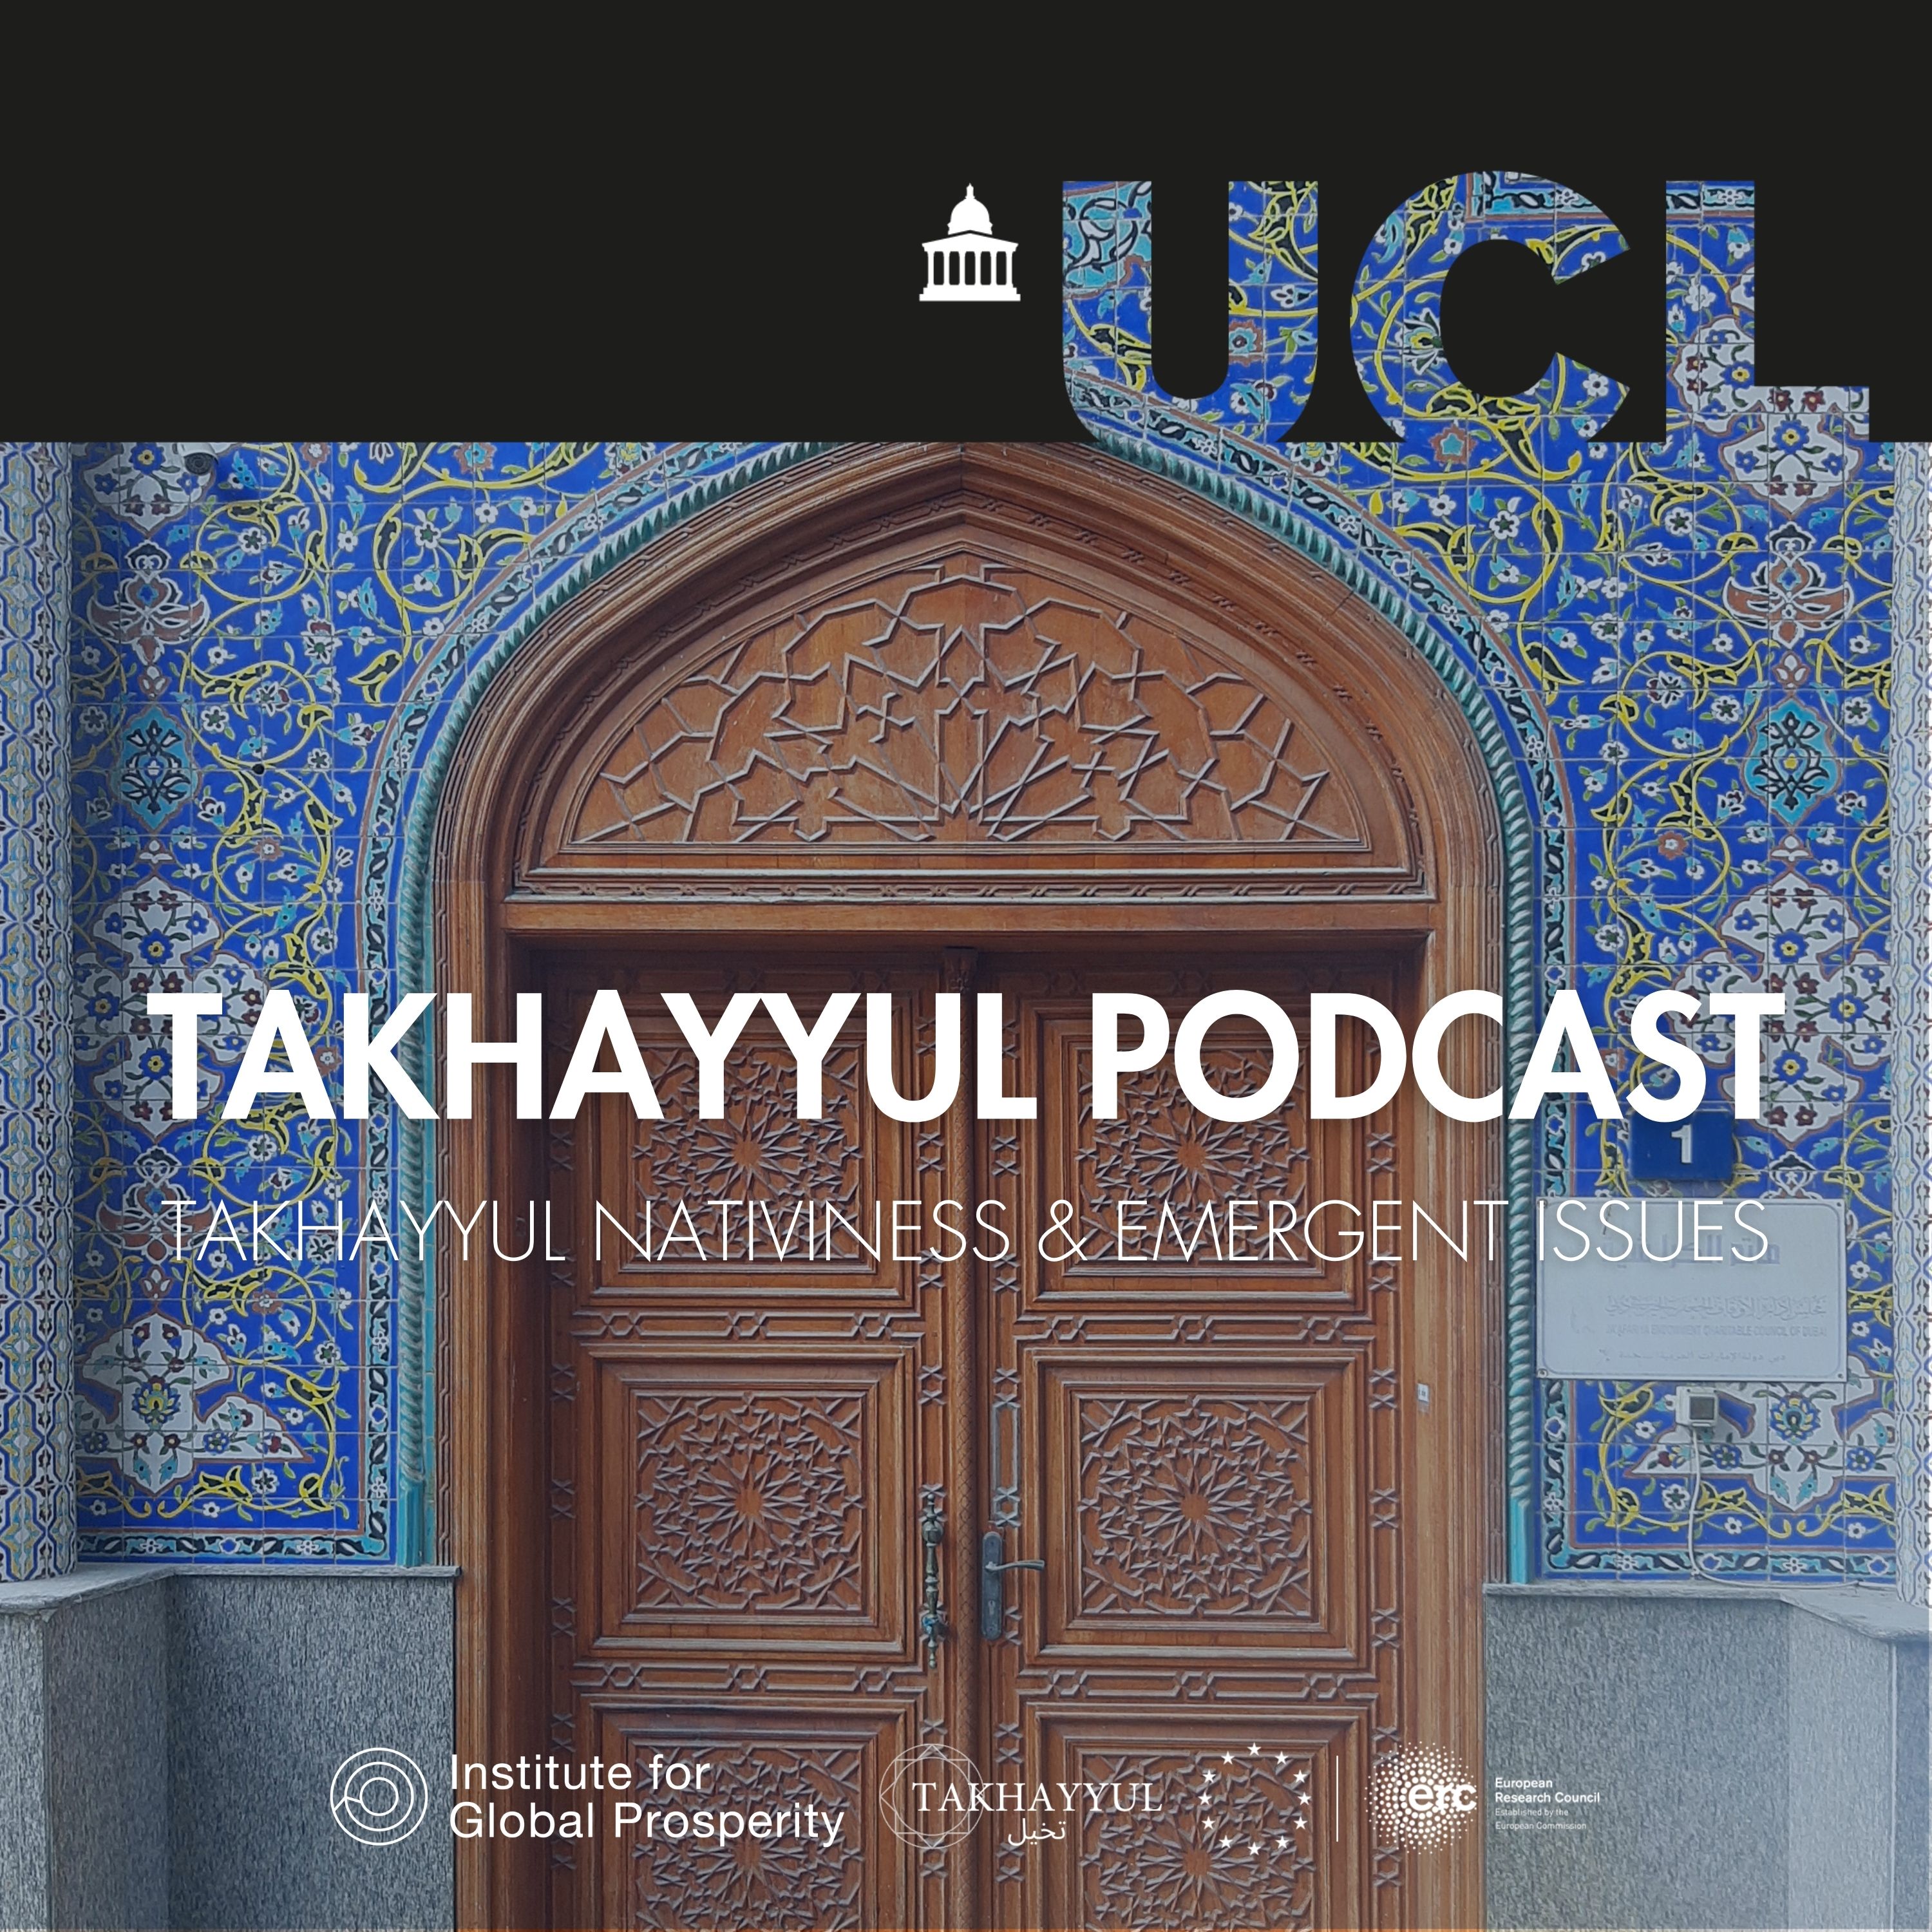 Podcast cover showing a door